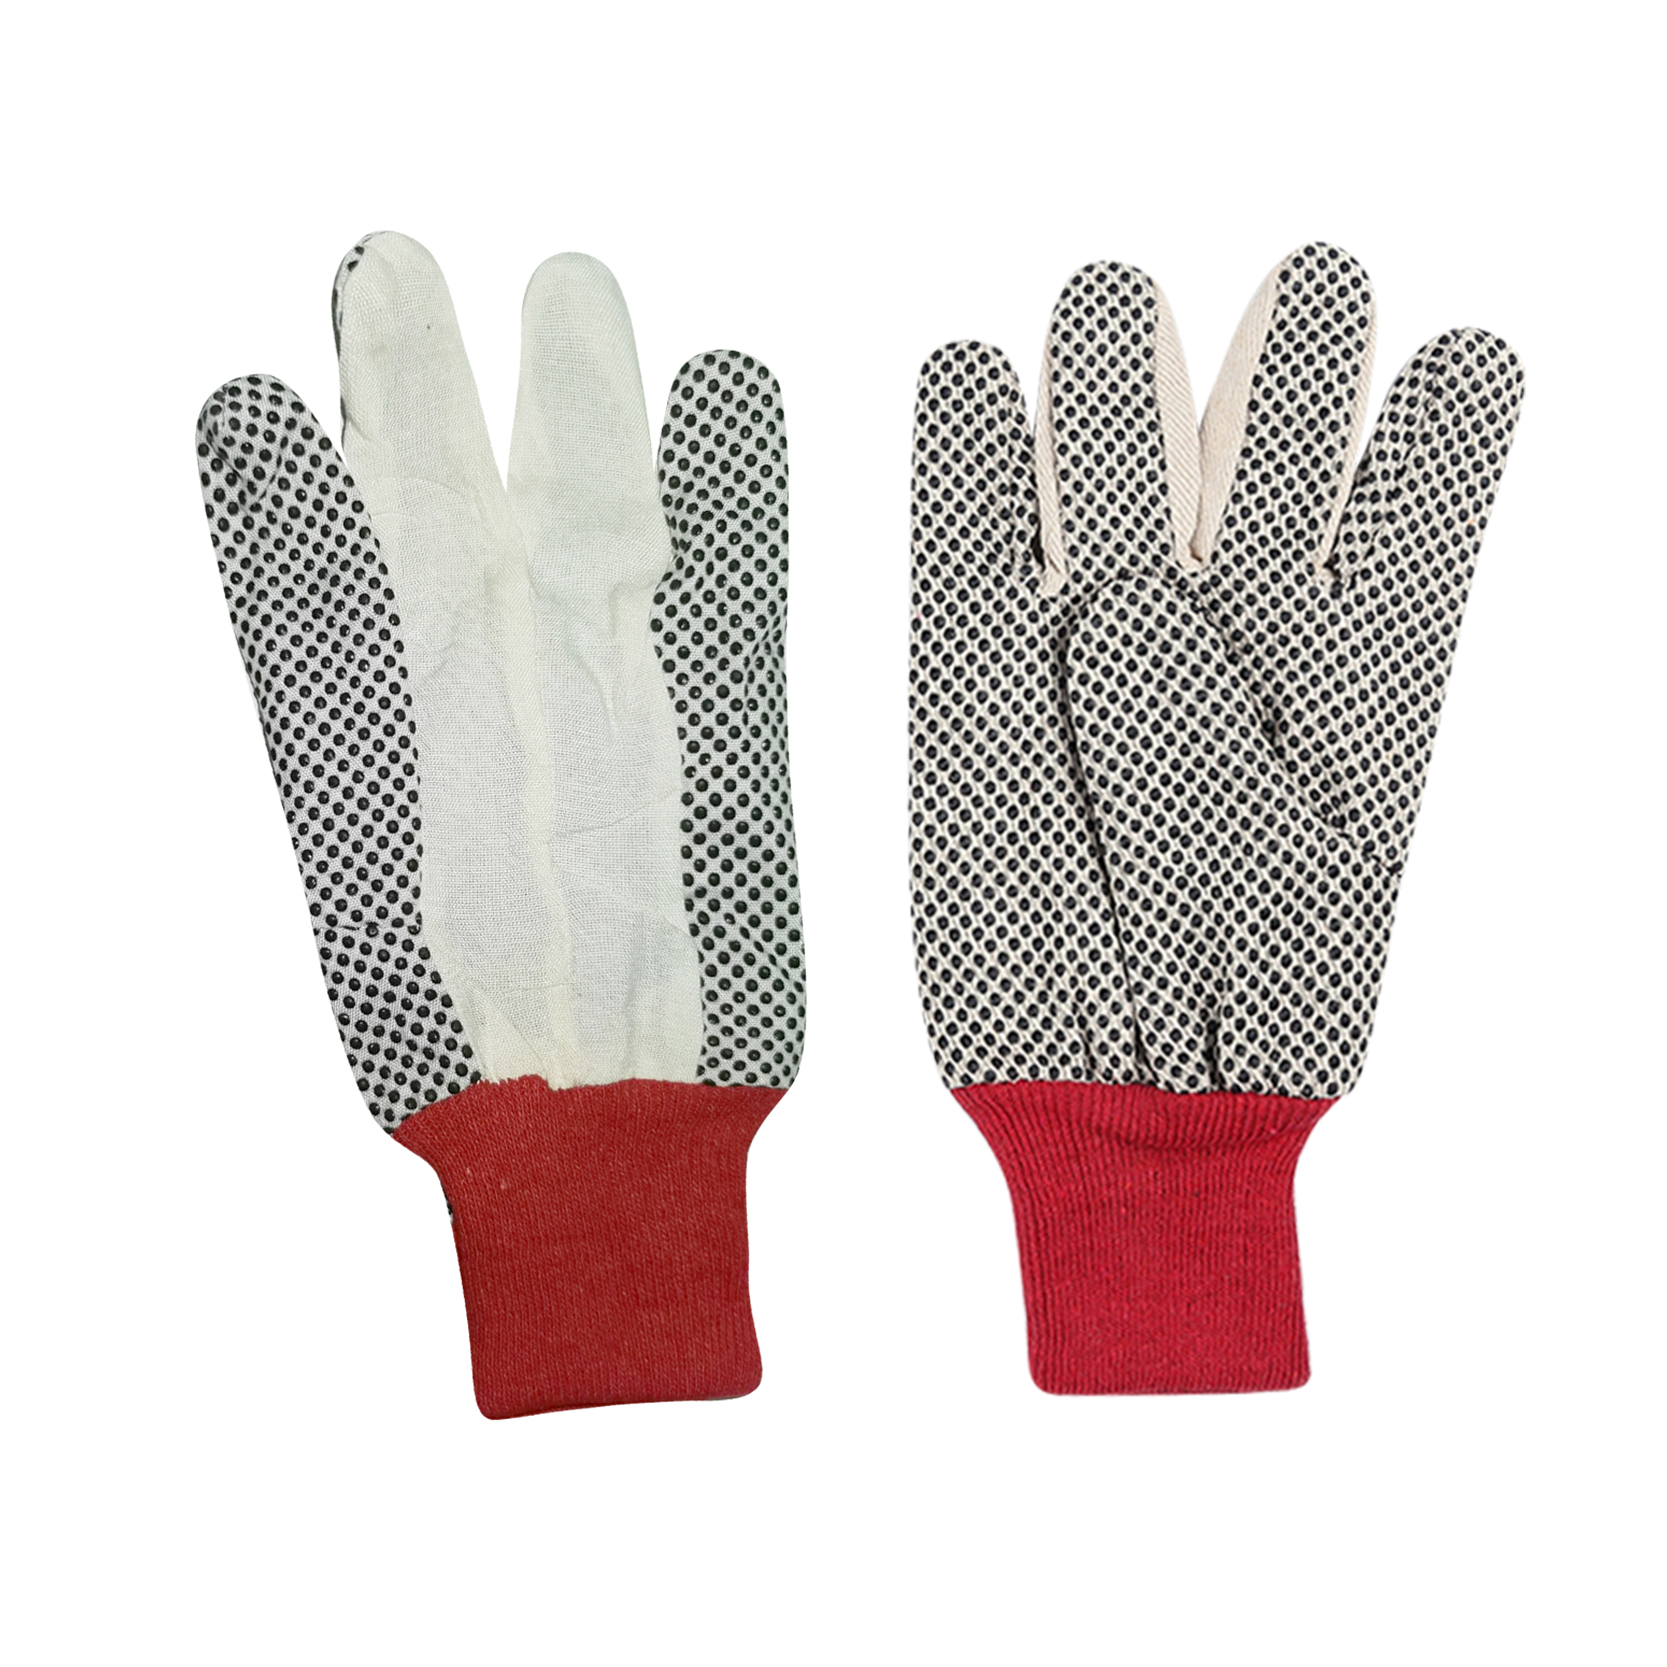 Red & White PVC Dotted Drill Gloves Wrist Work Gloves Hand Protection Knitted Gloves Cotton & Poly Cotton Fabric all Sizes